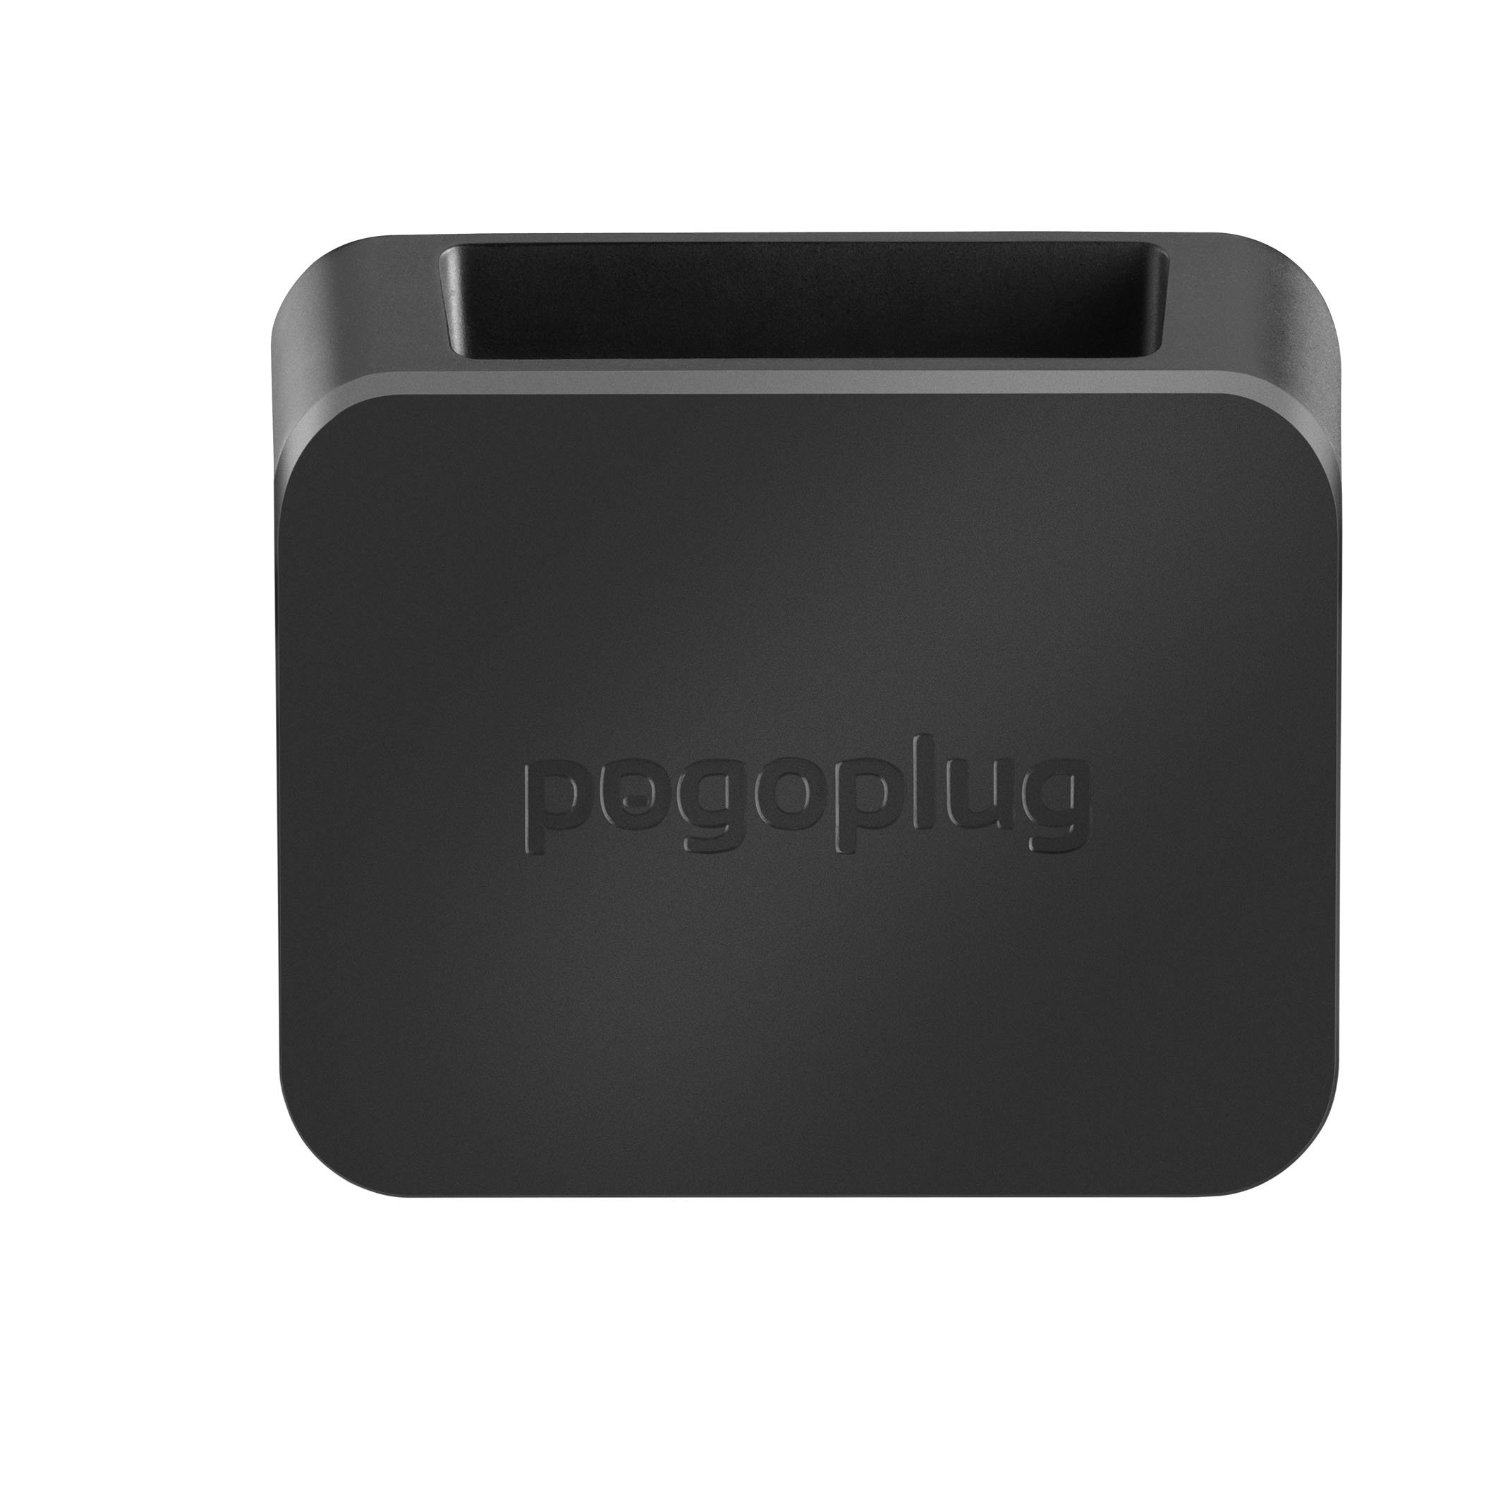 http://thetechjournal.com/wp-content/uploads/images/1202/1330156769-pogoplug-series-4-multimedia-sharing-device-18.jpg